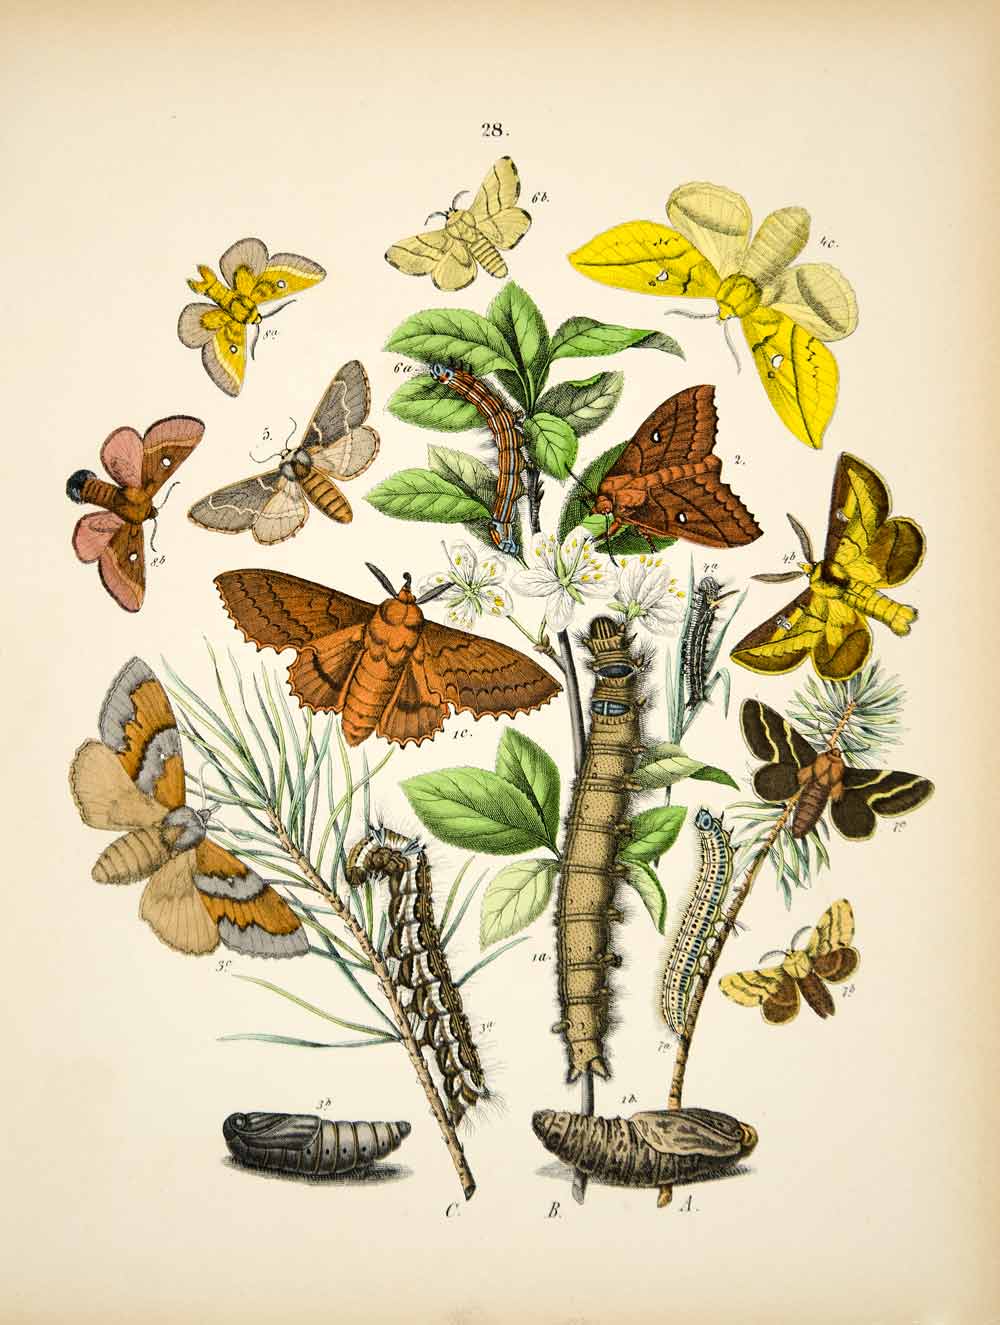 1882 Hand-Colored Lithograph WF Kirby Art Lappet Eggars Lackey Moth Insect EBM1